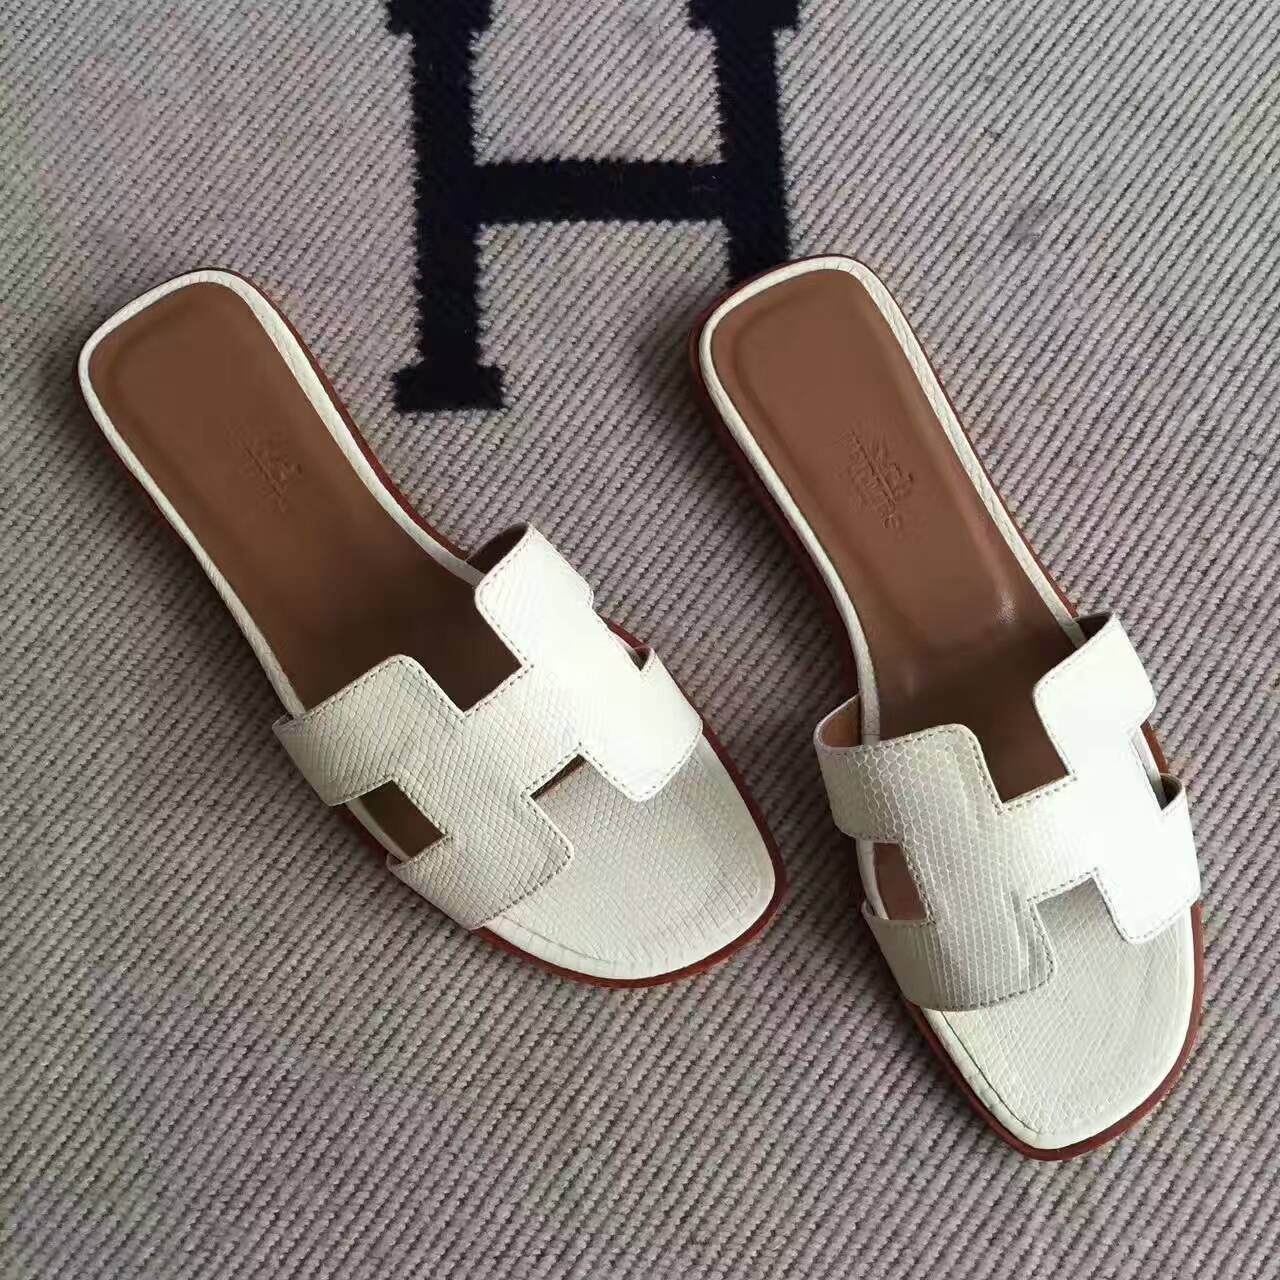 white hermes shoes